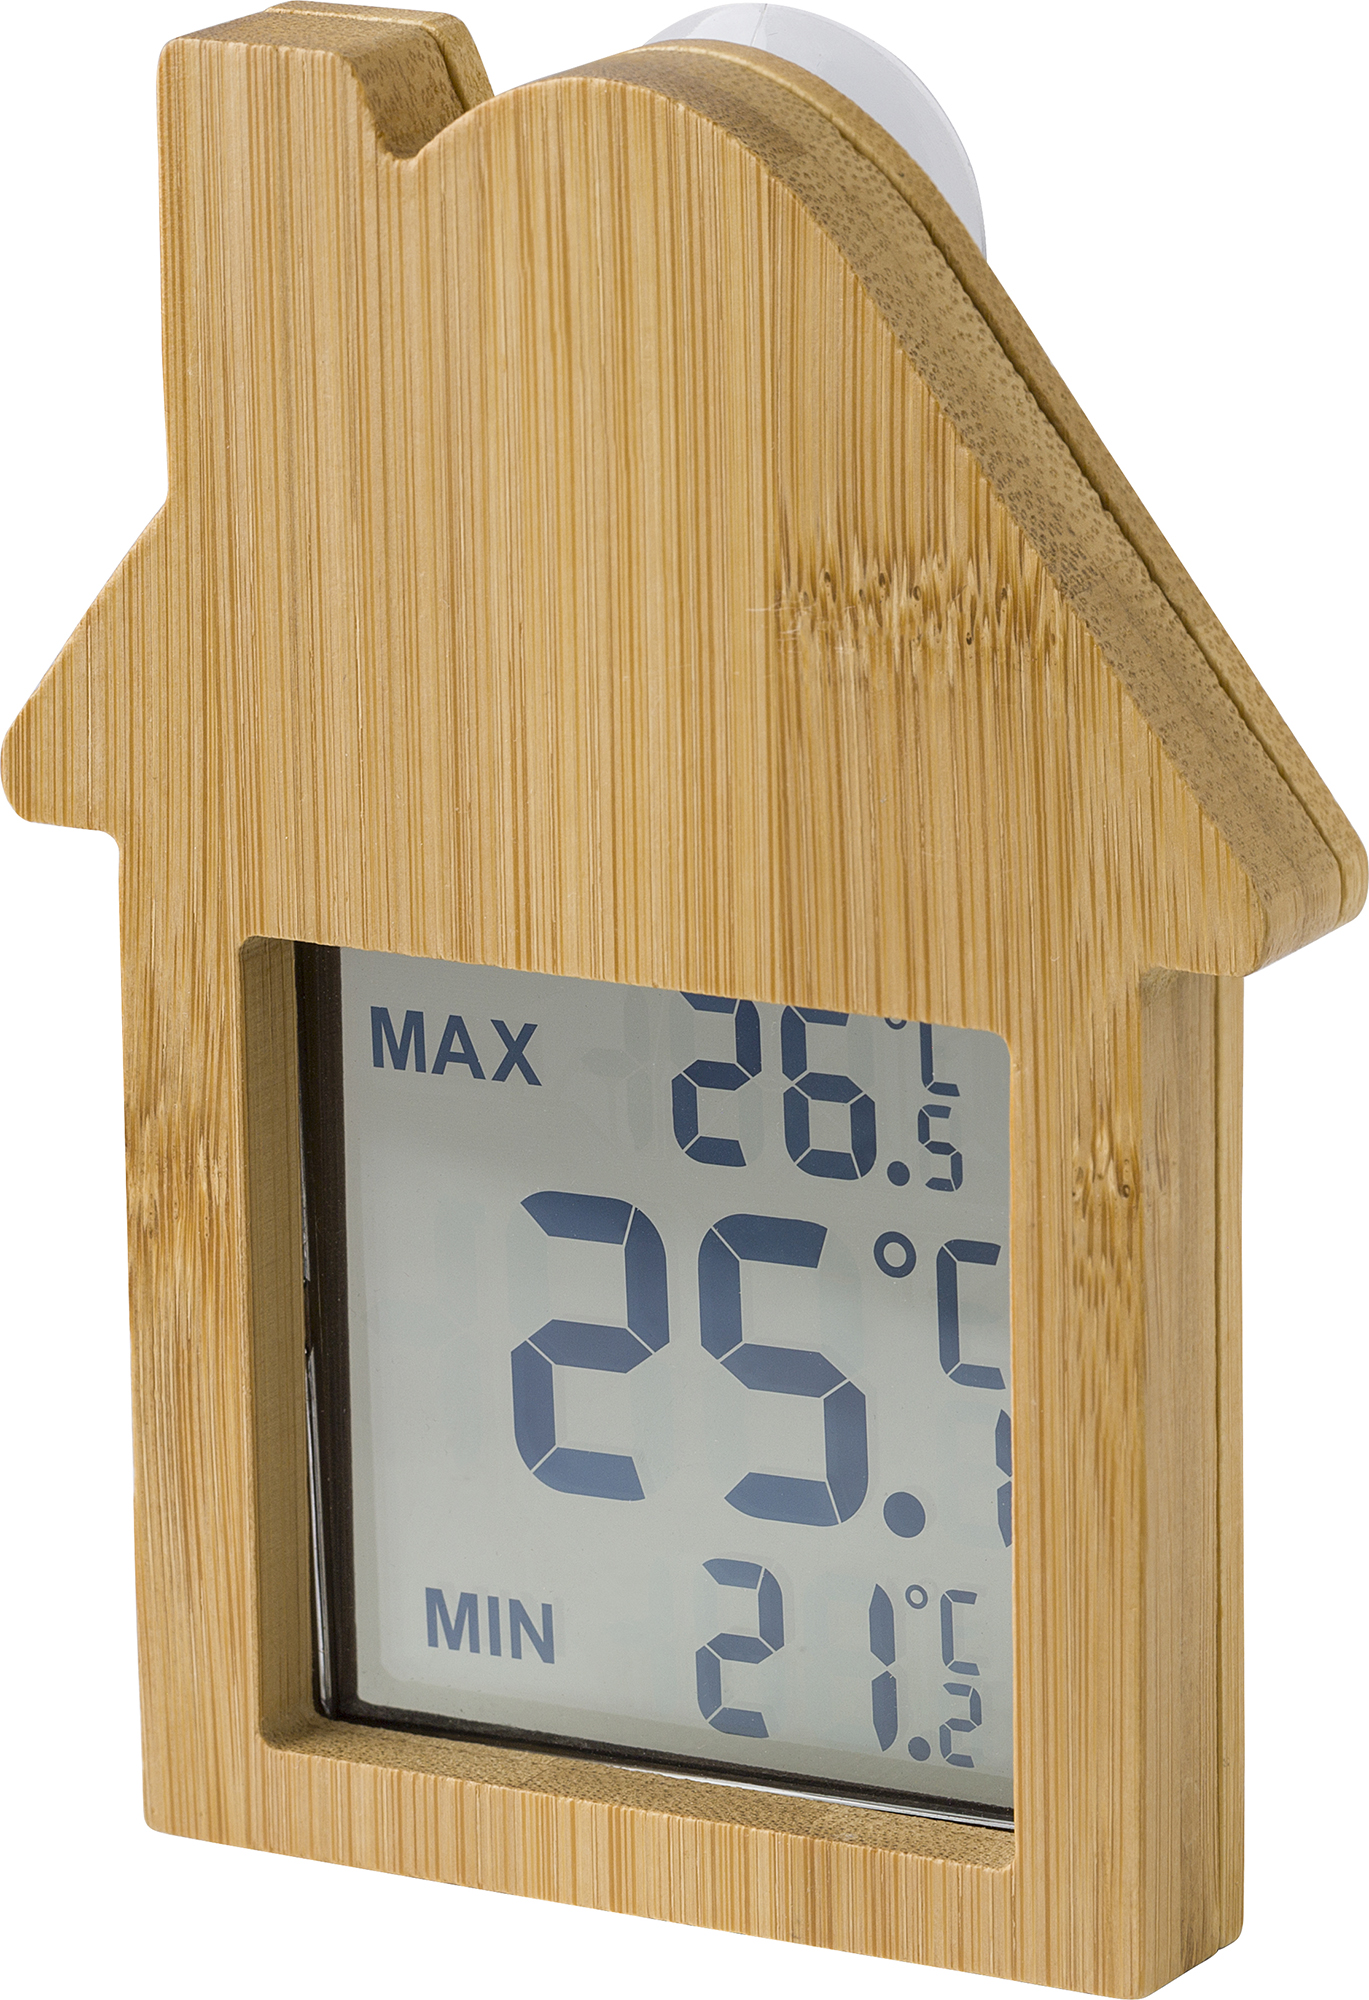 000000966192 011999999 3d045 rgt pro01 2023 fal - Bamboo House weather station